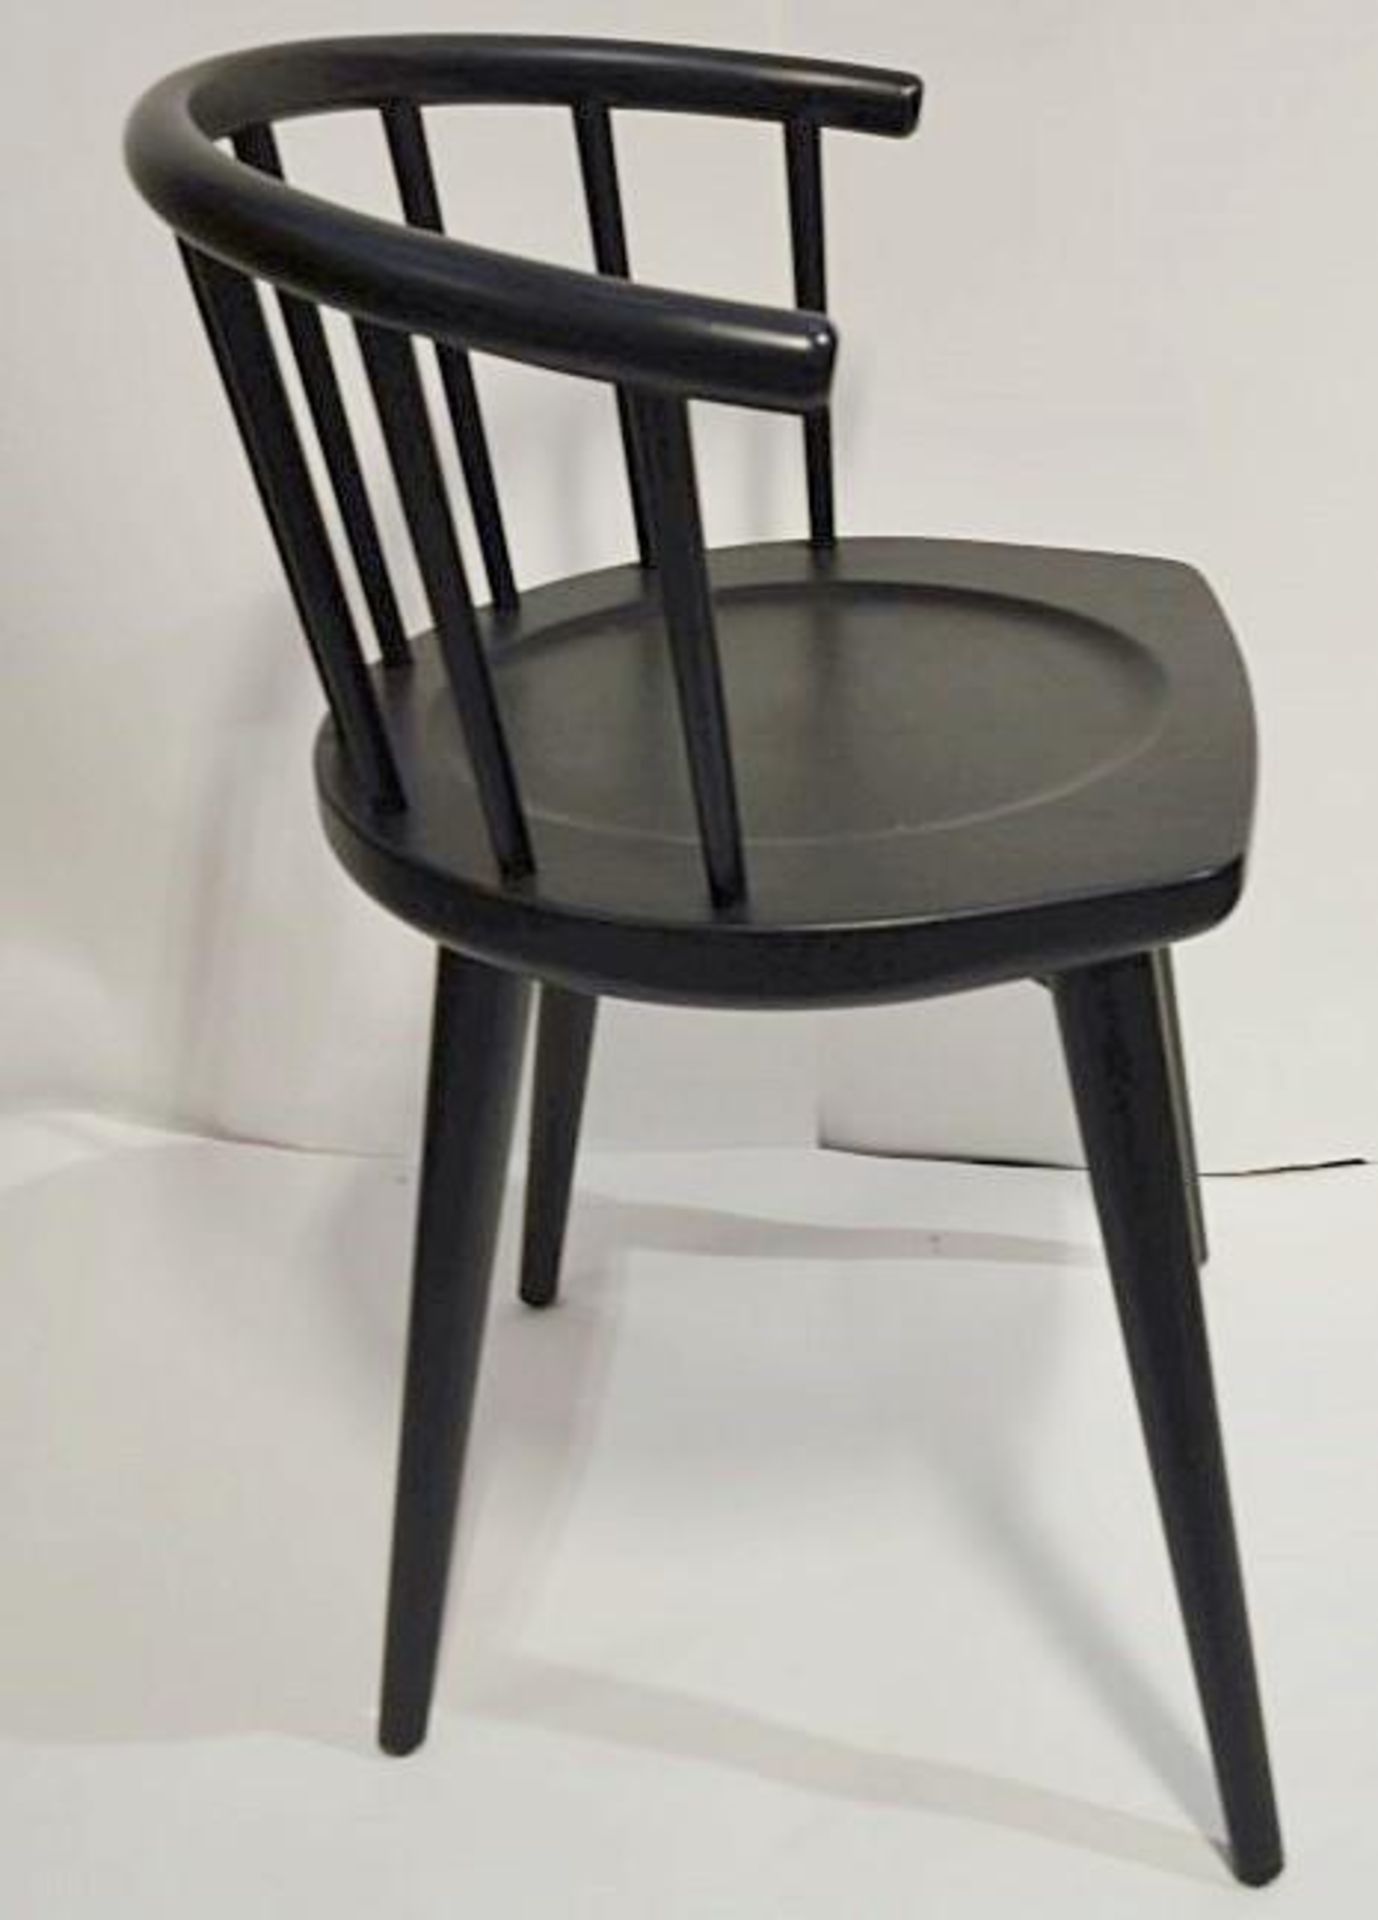 4 x Curved Spindleback Wooden Dining Chairs With Shaped Seats and Dark Finish - Dimensions: H73 x - Image 4 of 6